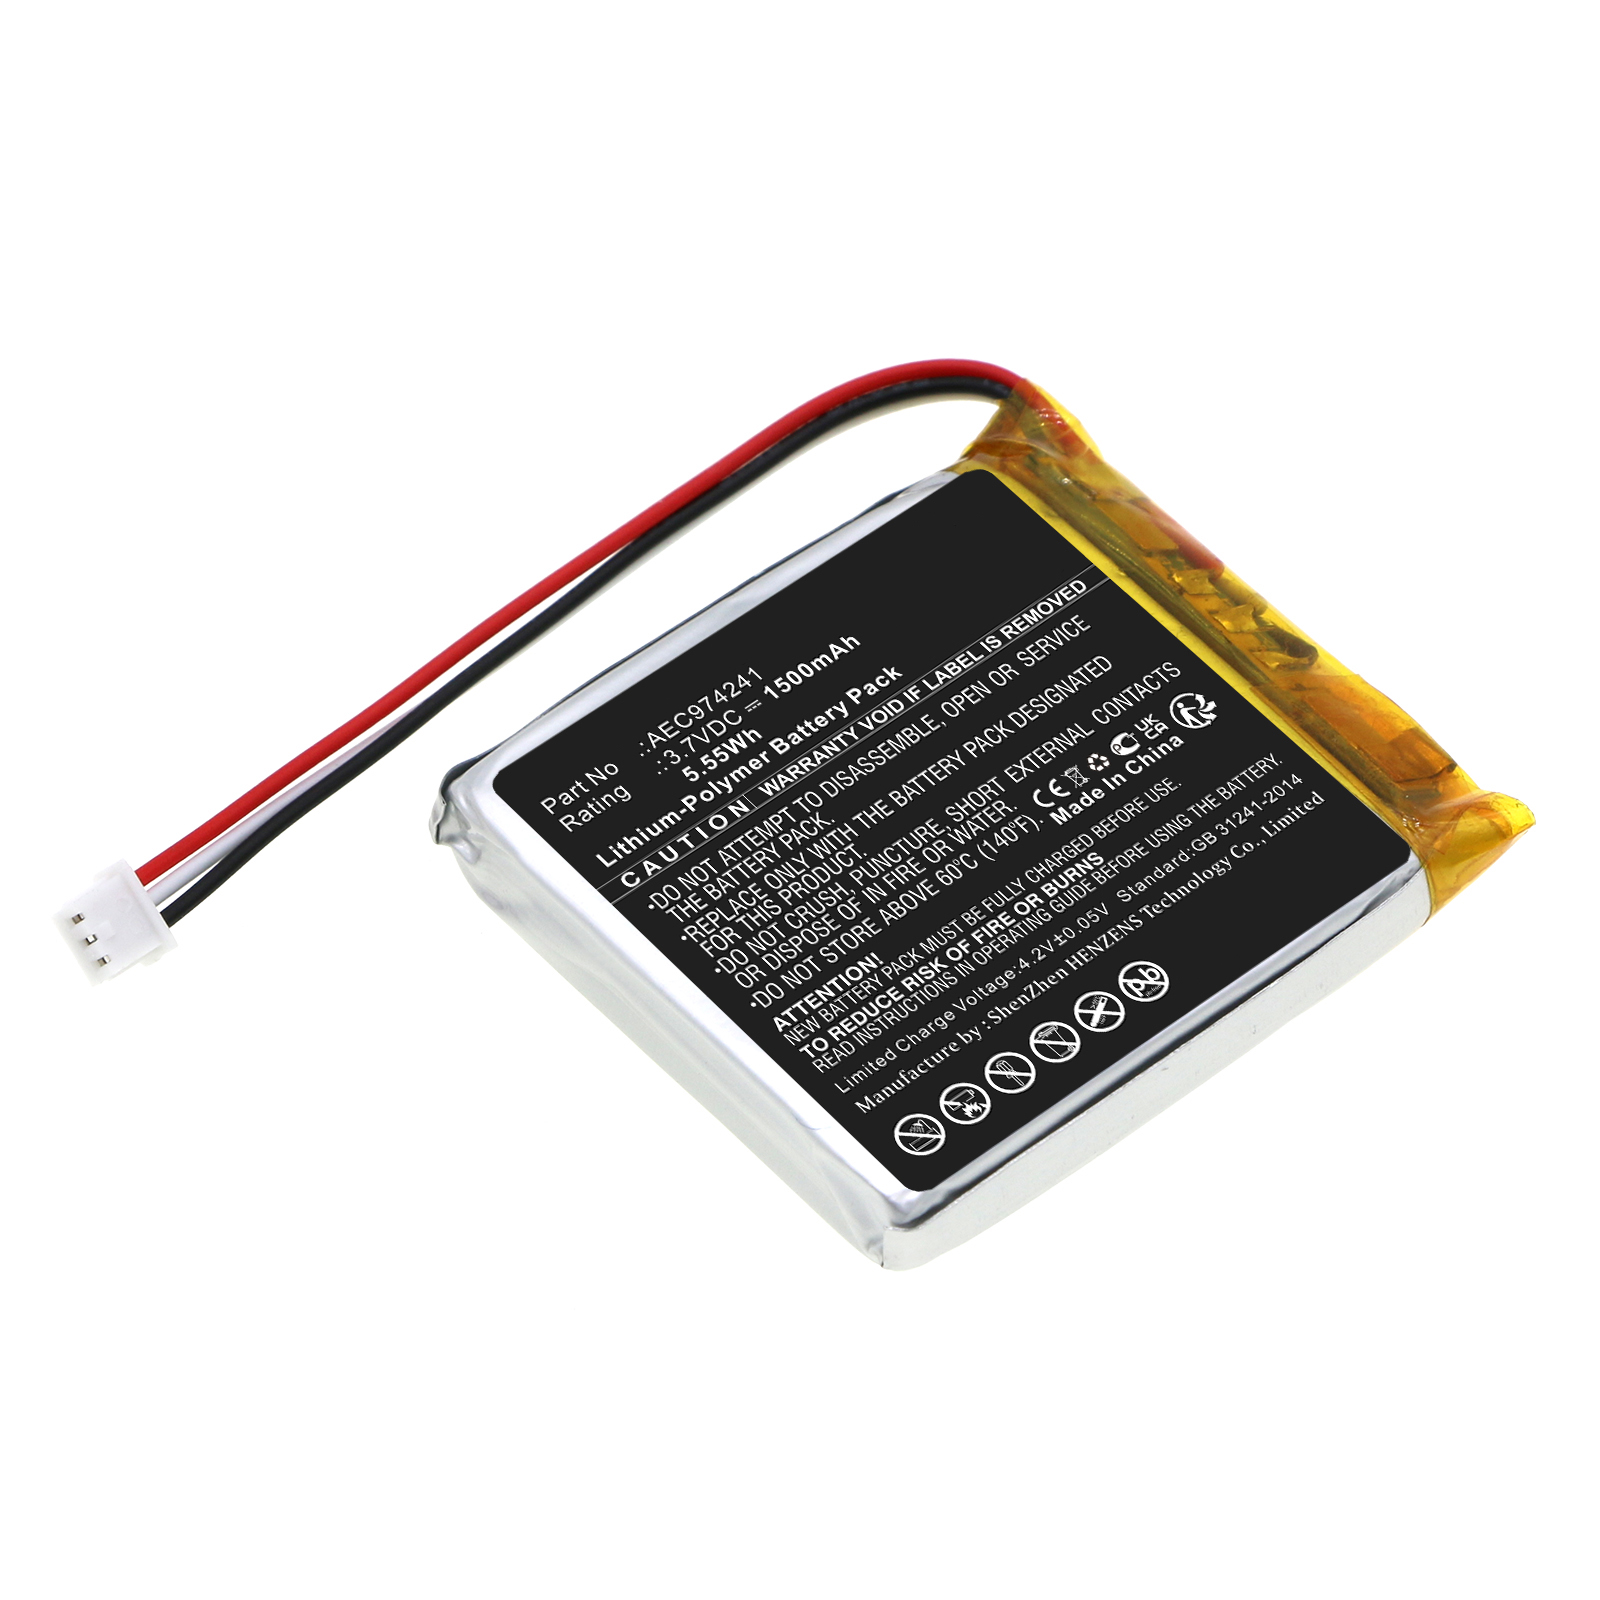 Synergy Digital Projector Battery, Compatible with Philips AEC974241 Projector Battery (Li-Pol, 3.7V, 1500mAh)